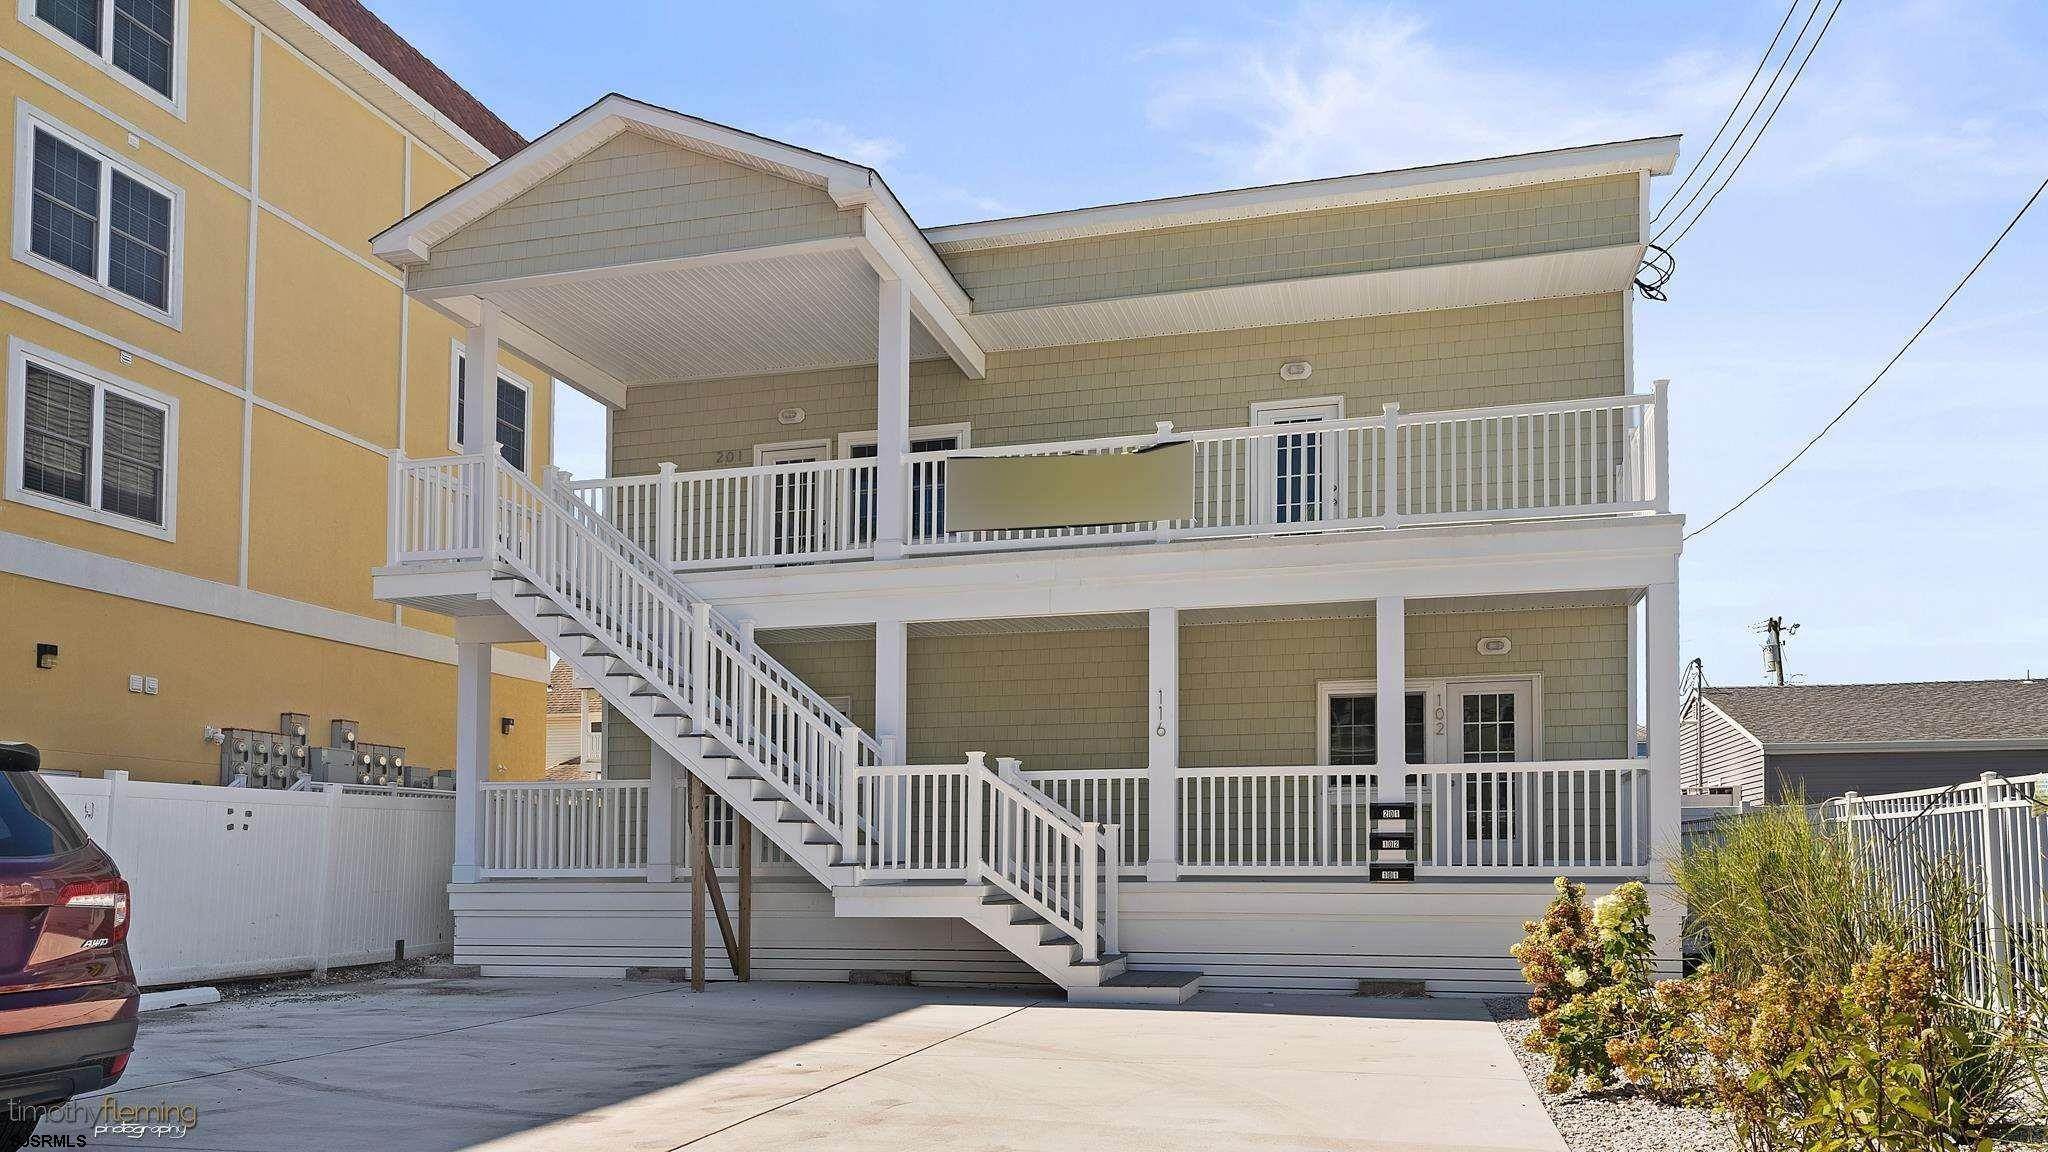 Condominiums for Sale at 116 W Spruce Avenue North Wildwood, New Jersey 08260 United States